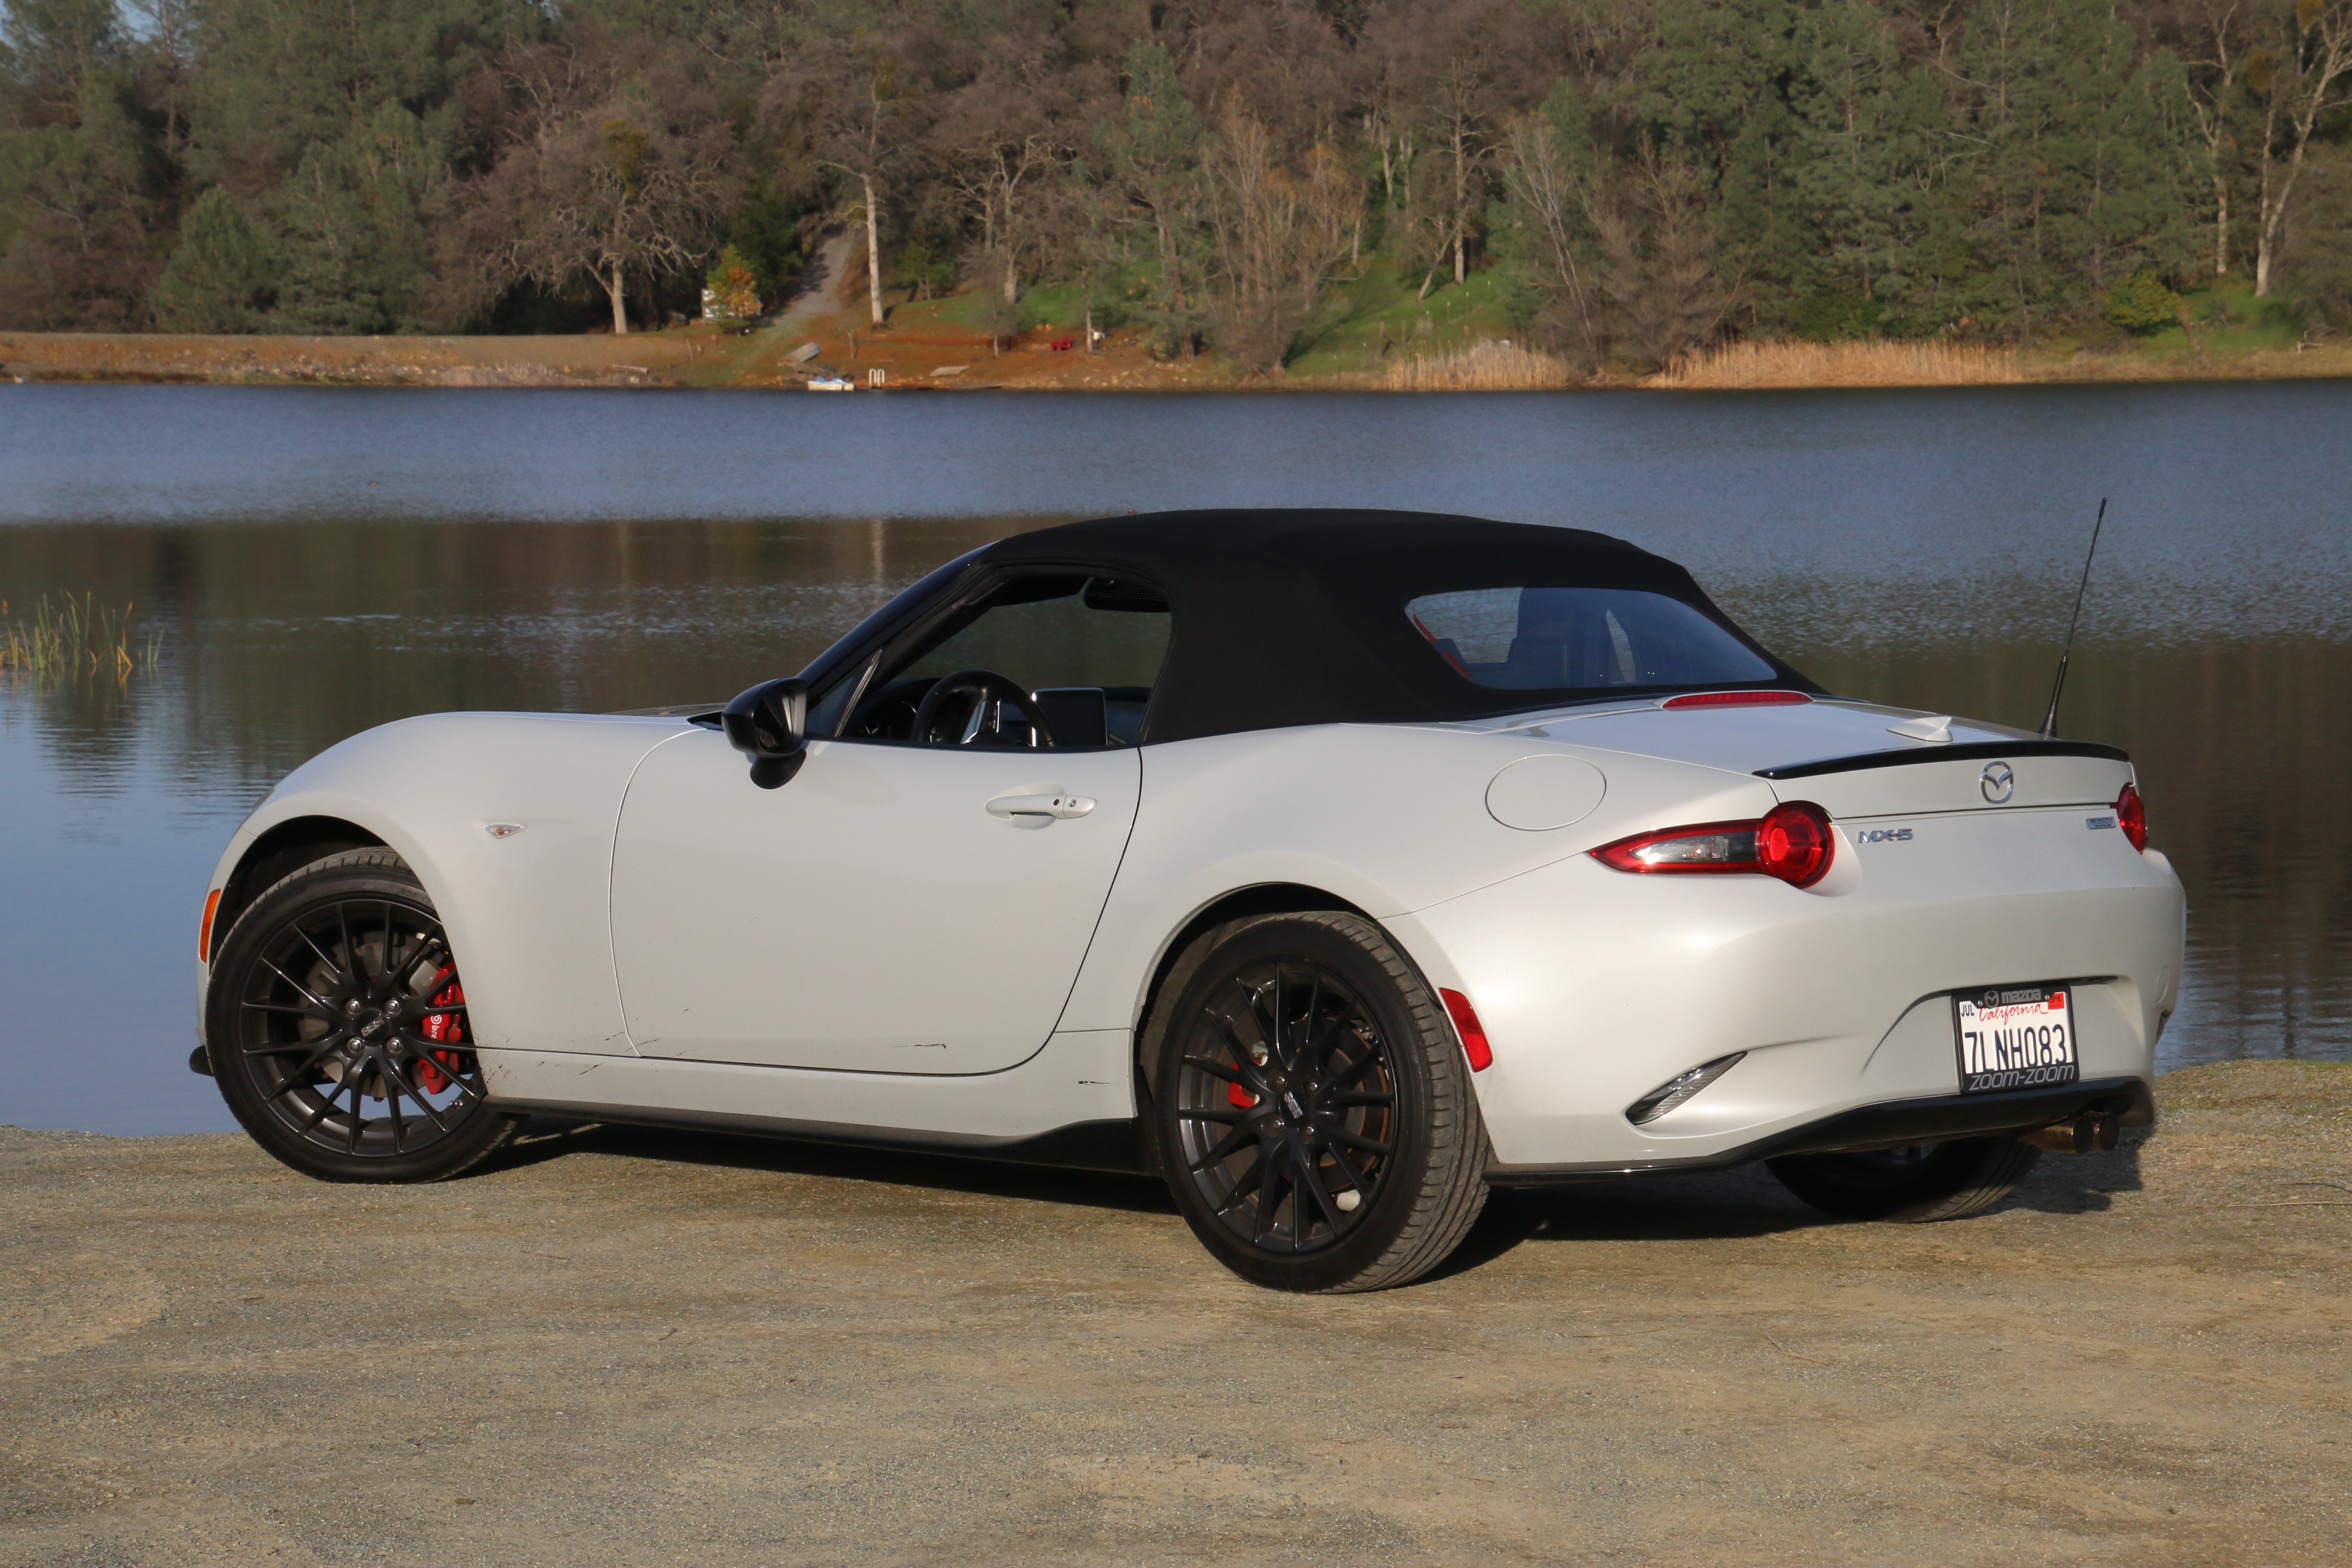 The latest Miata returns to its roots with design and handling. Photos/Larry Weitzman